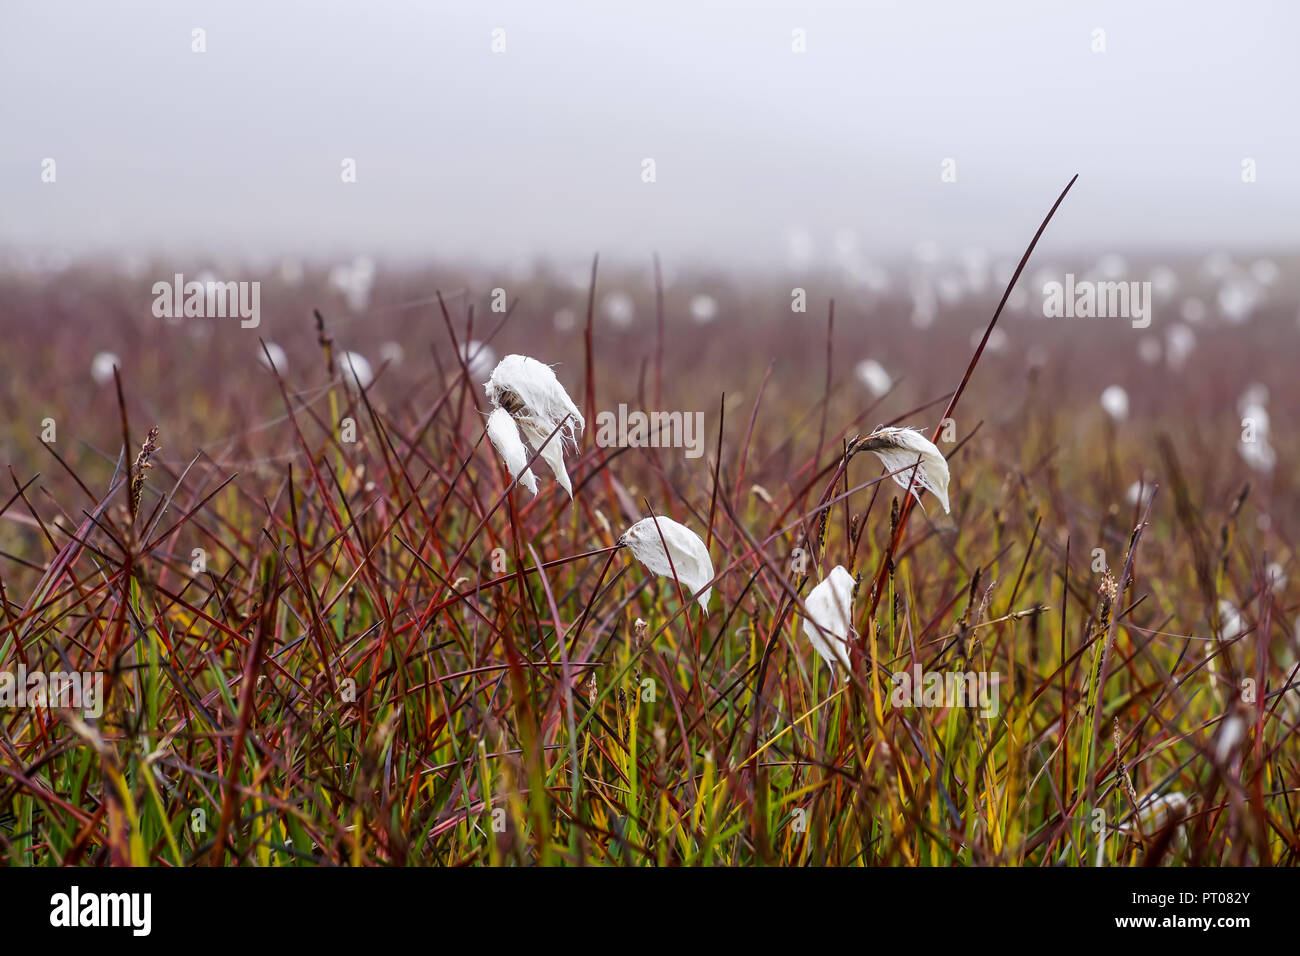 Field of cotton grass in iceland Stock Photo